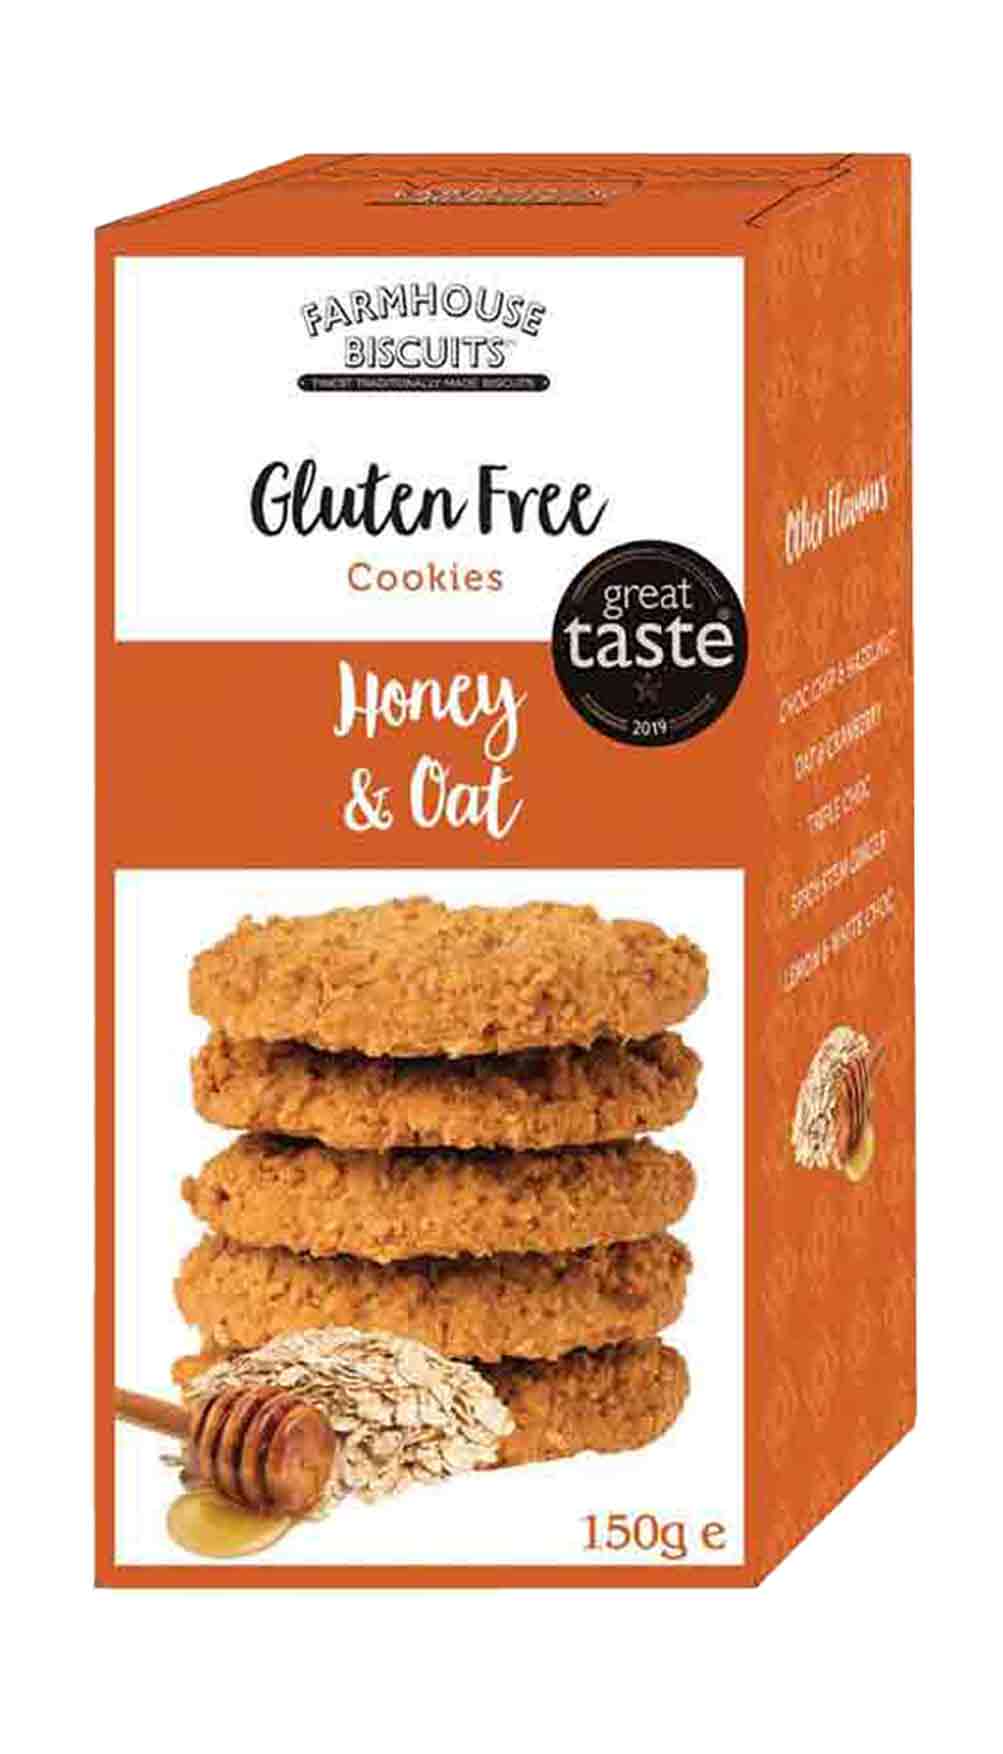 Farmhouse Biscuits Gluten-Free Honey and Oat Cookies 150g